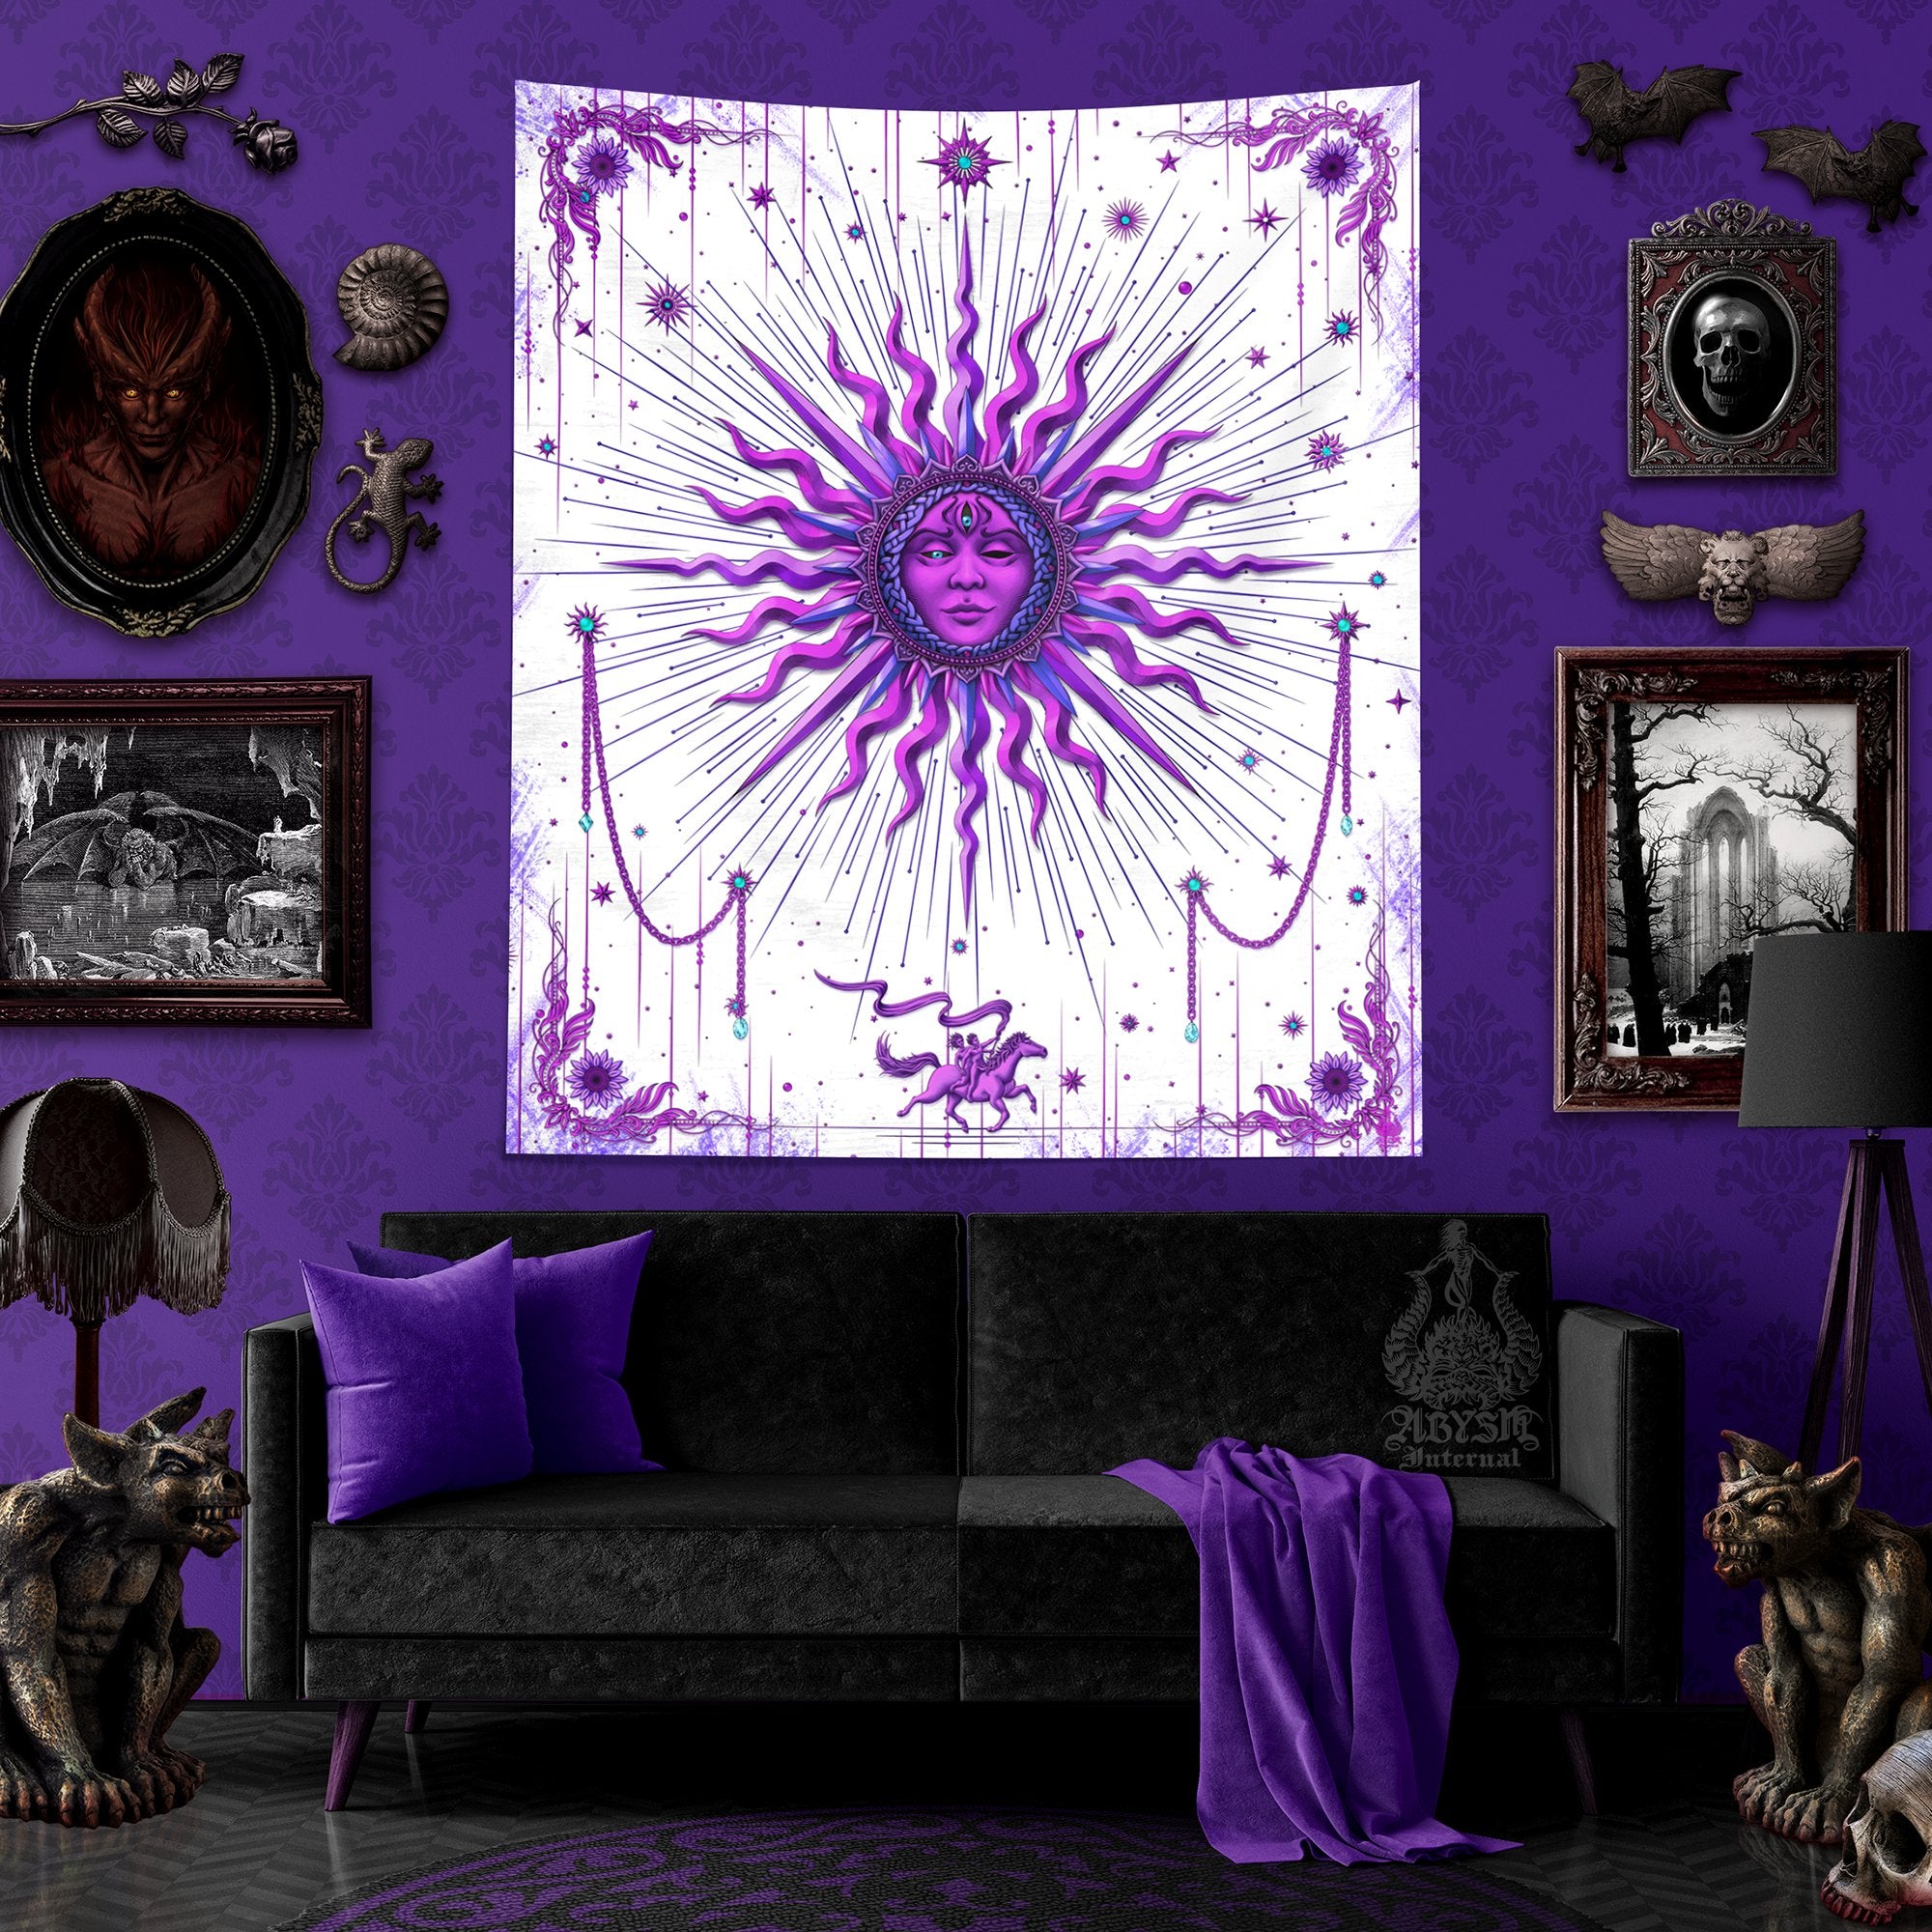 Purple Sun Tapestry, Tarot Card Arcana Wall Hanging, White Goth Witchy Home, Magic and Esoteric Art, Gothic Witch's Room Decor, Vertical Print - Abysm Internal